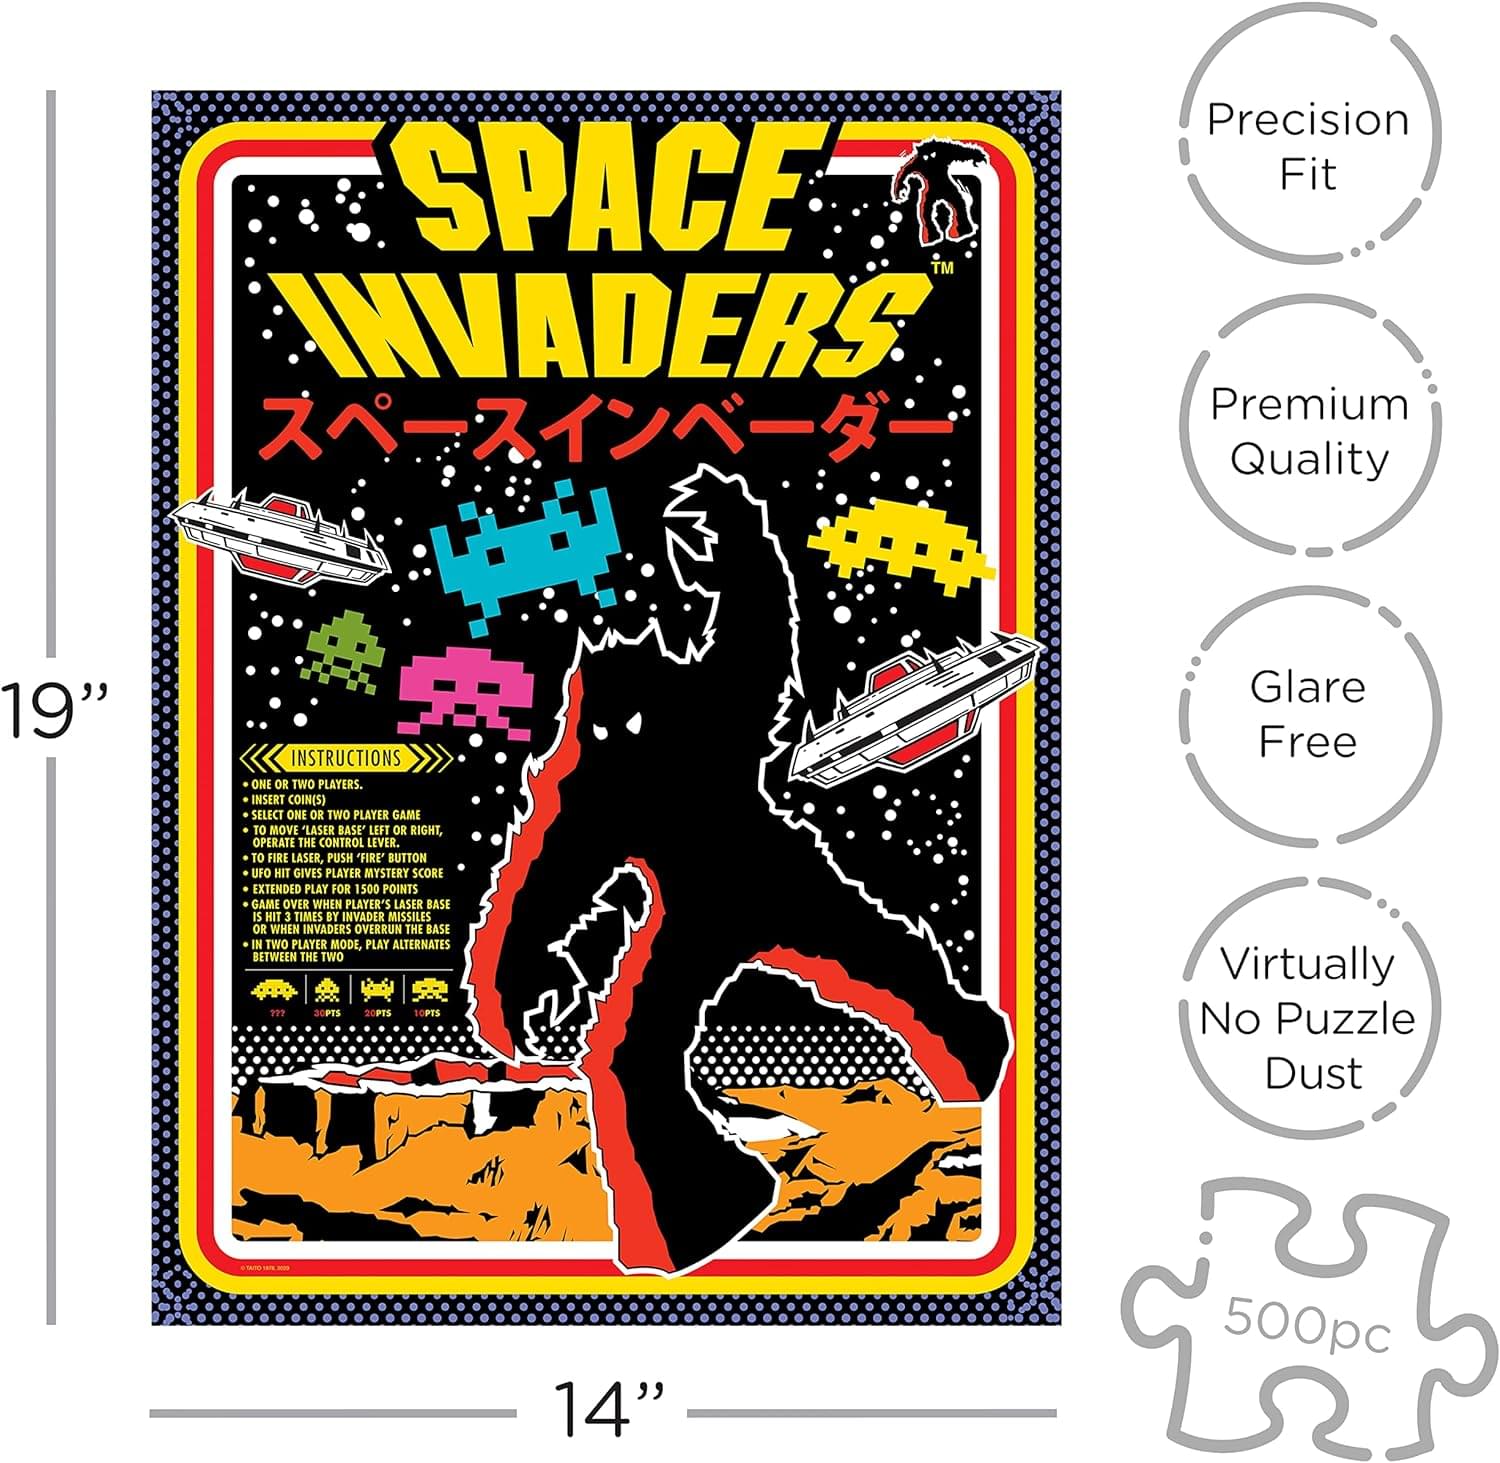 Space Invaders 500 Piece Jigsaw Puzzle